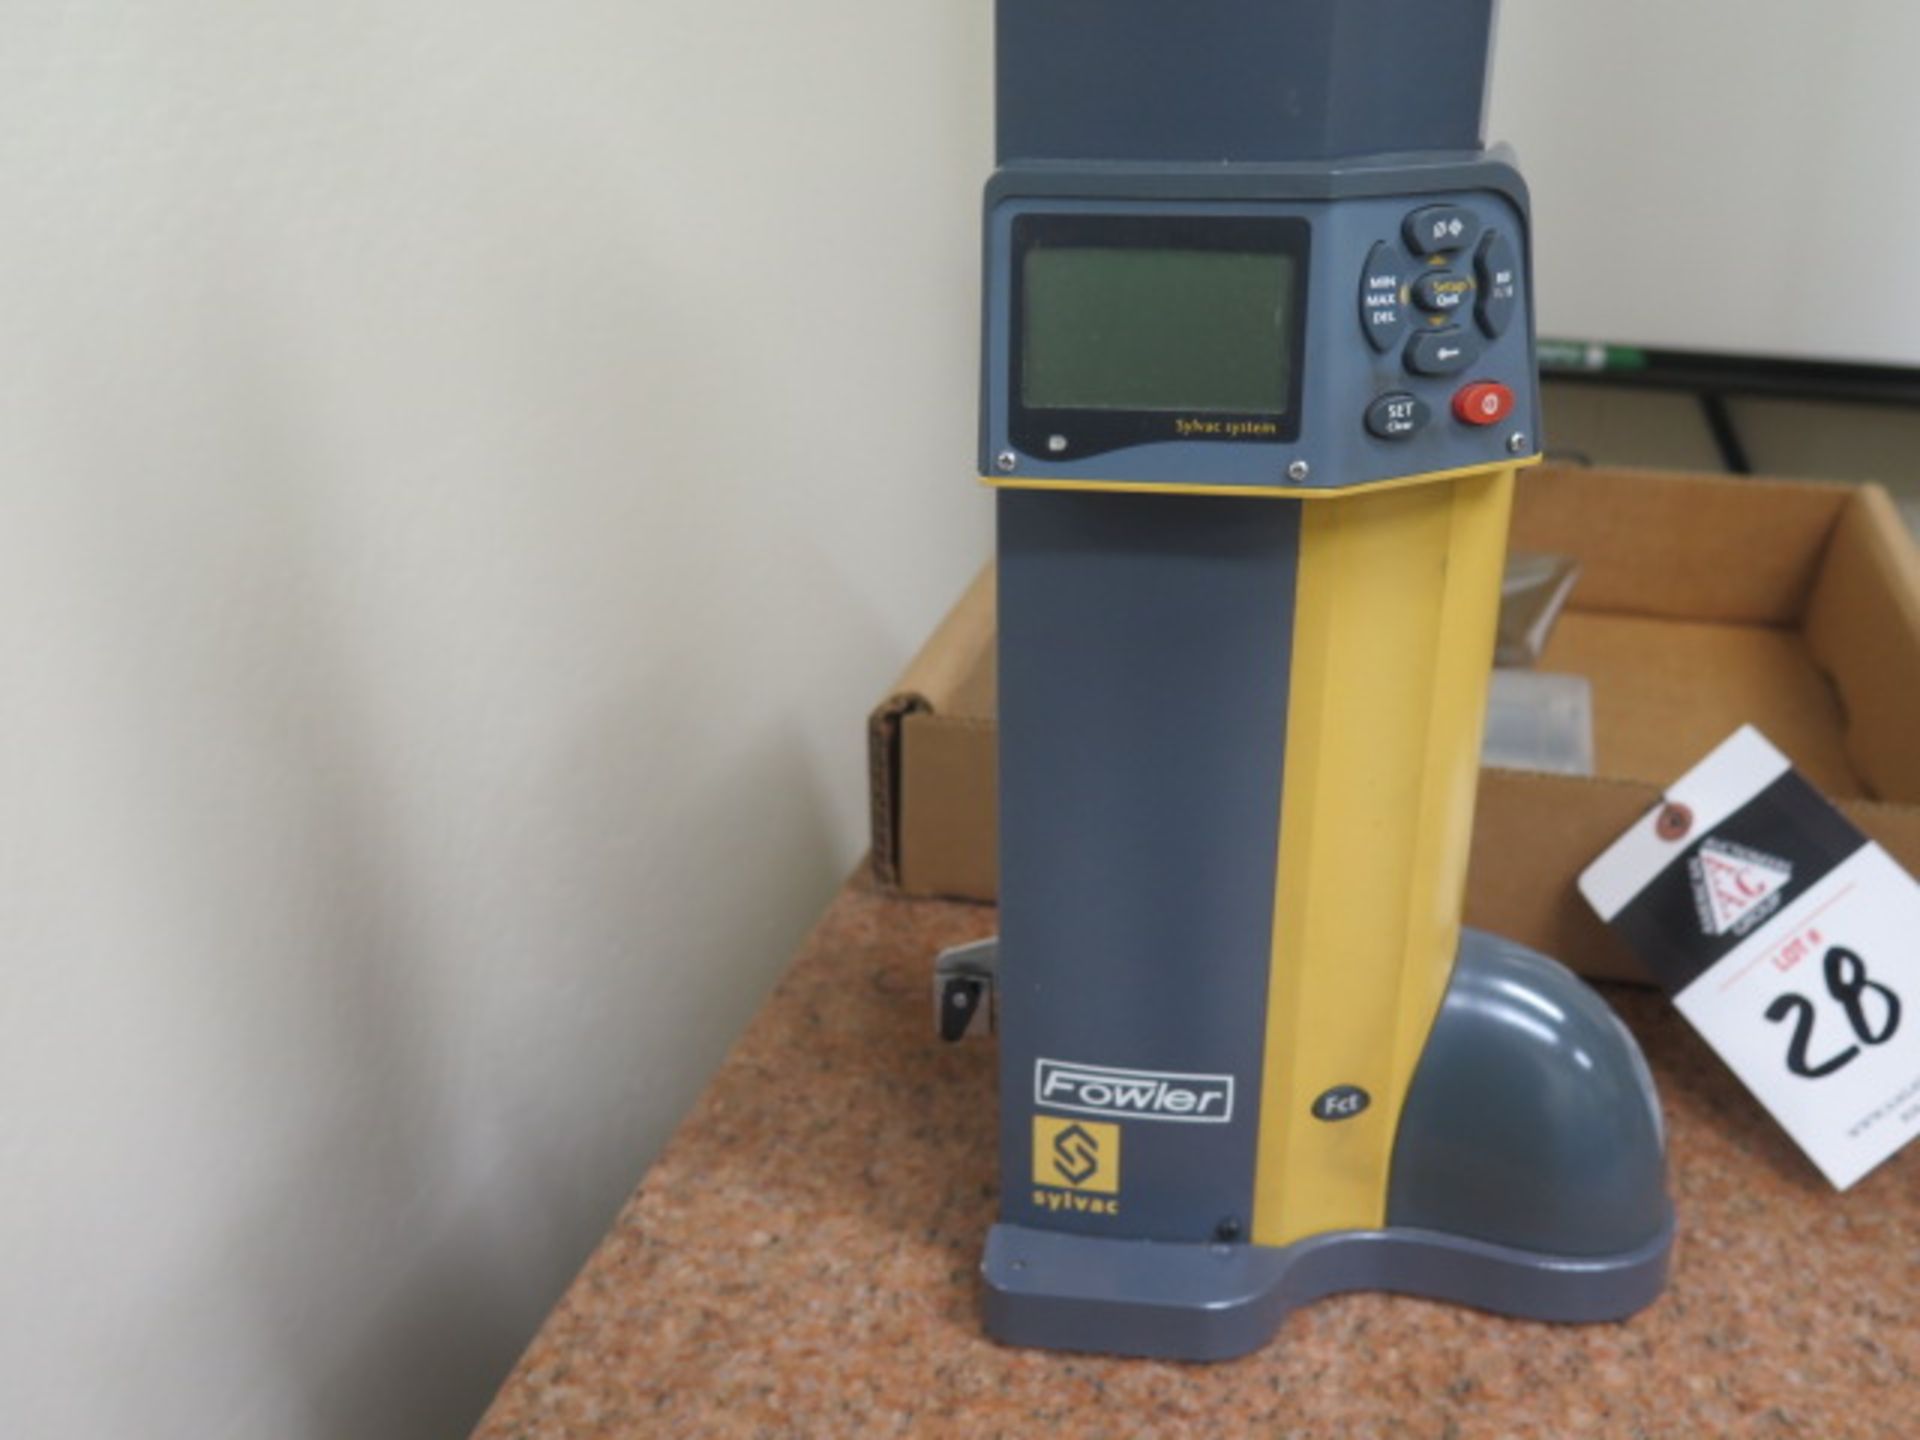 Fowler Sylvac Hi_CAL 300 12” Digital Height Gage w/ Access (SOLD AS-IS - NO WARRANTY) - Image 3 of 8